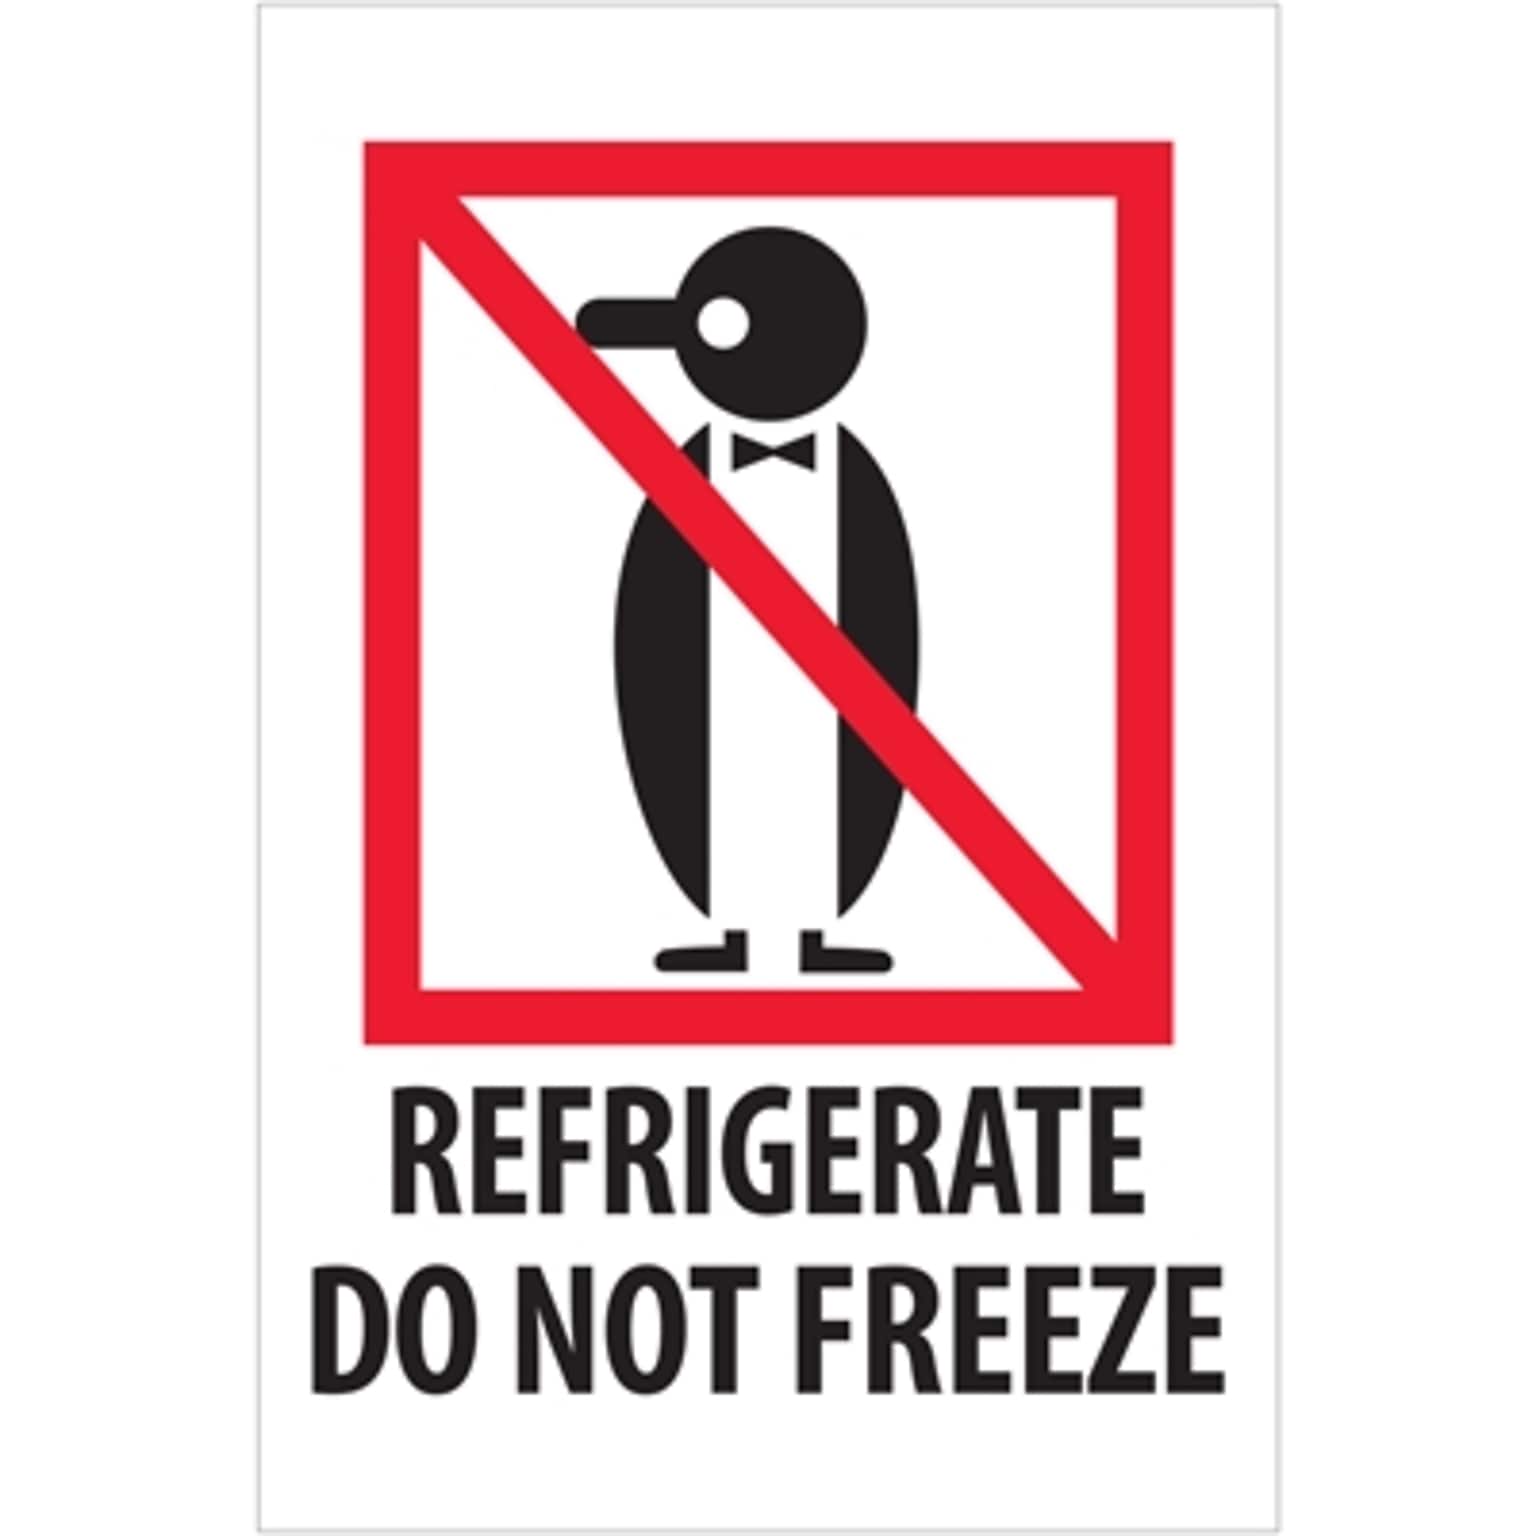 Tape Logic Labels, Refrigerate Do Not Freeze, 4 x 6, Red/White/Black, 500/Roll (IPM505)